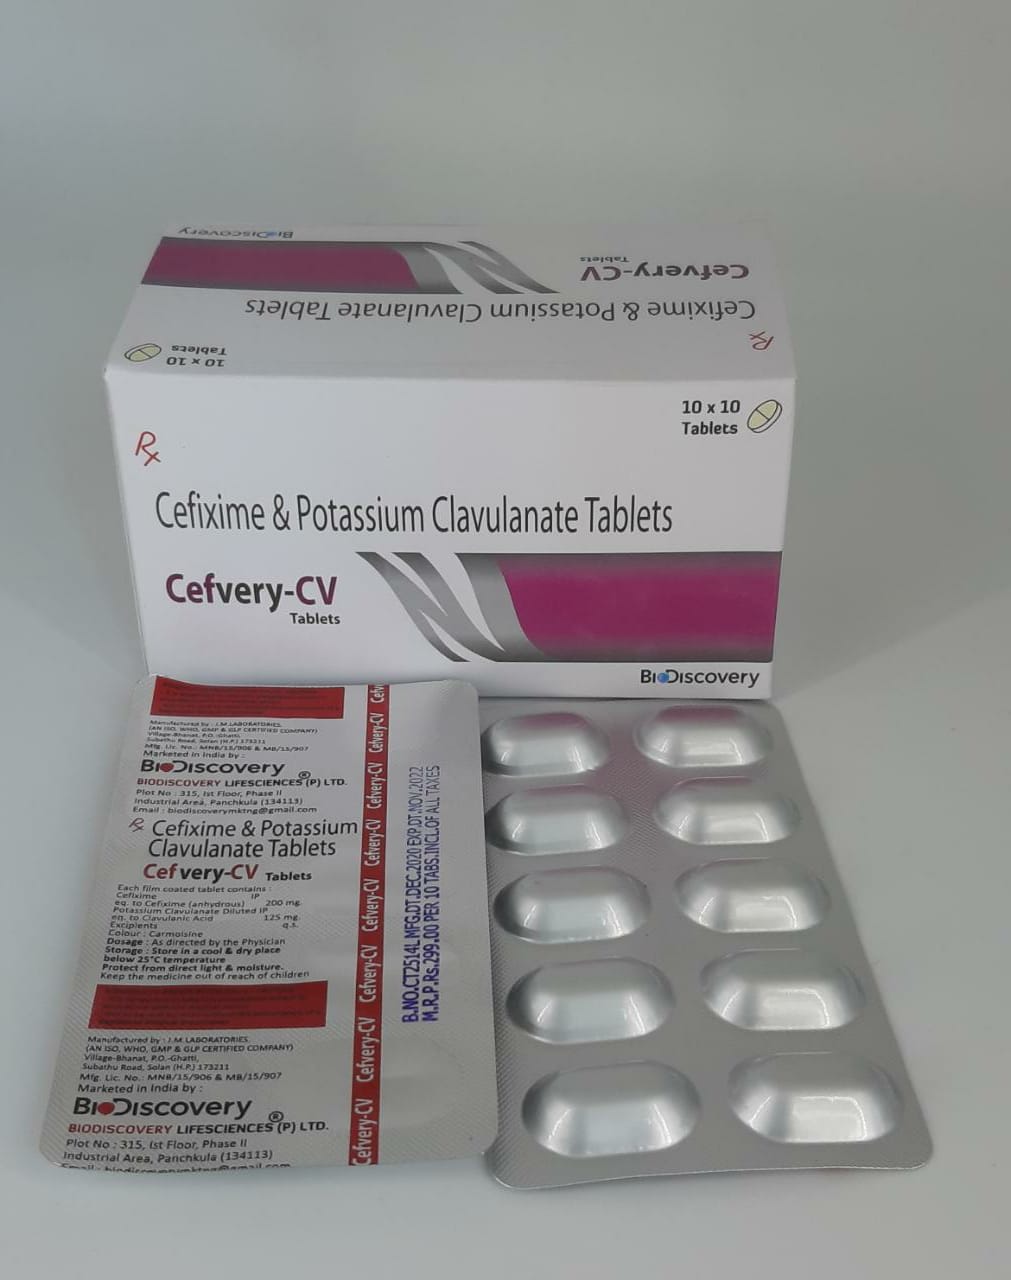 Product Name: Cefvery CV, Compositions of Cefixime & Potassium Clavulanate Tablets are Cefixime & Potassium Clavulanate Tablets - Biodiscovery Lifesciences Pvt Ltd